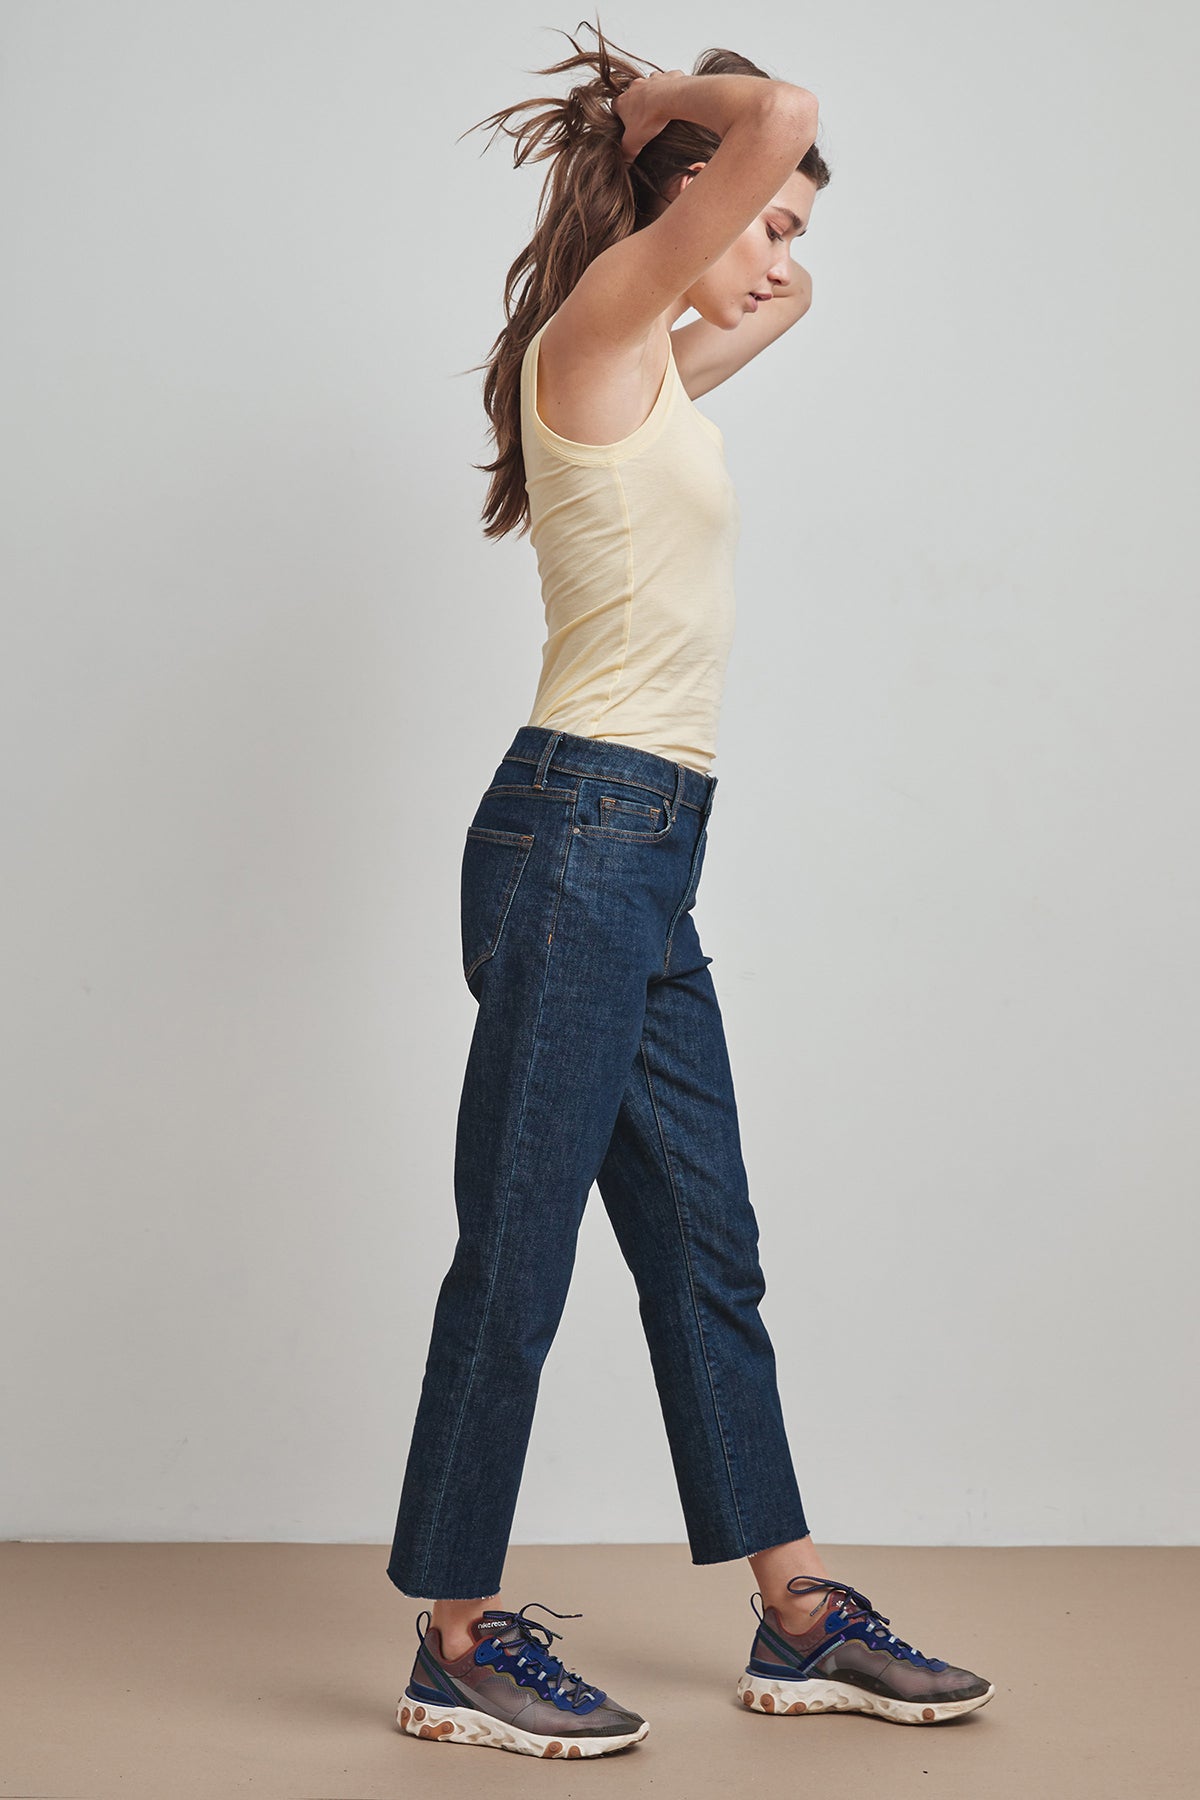   A woman embracing warmer days in a MOSSY GAUZY WHISPER FITTED TANK by Velvet by Graham & Spencer, paired with jeans for a trendy layering option. 